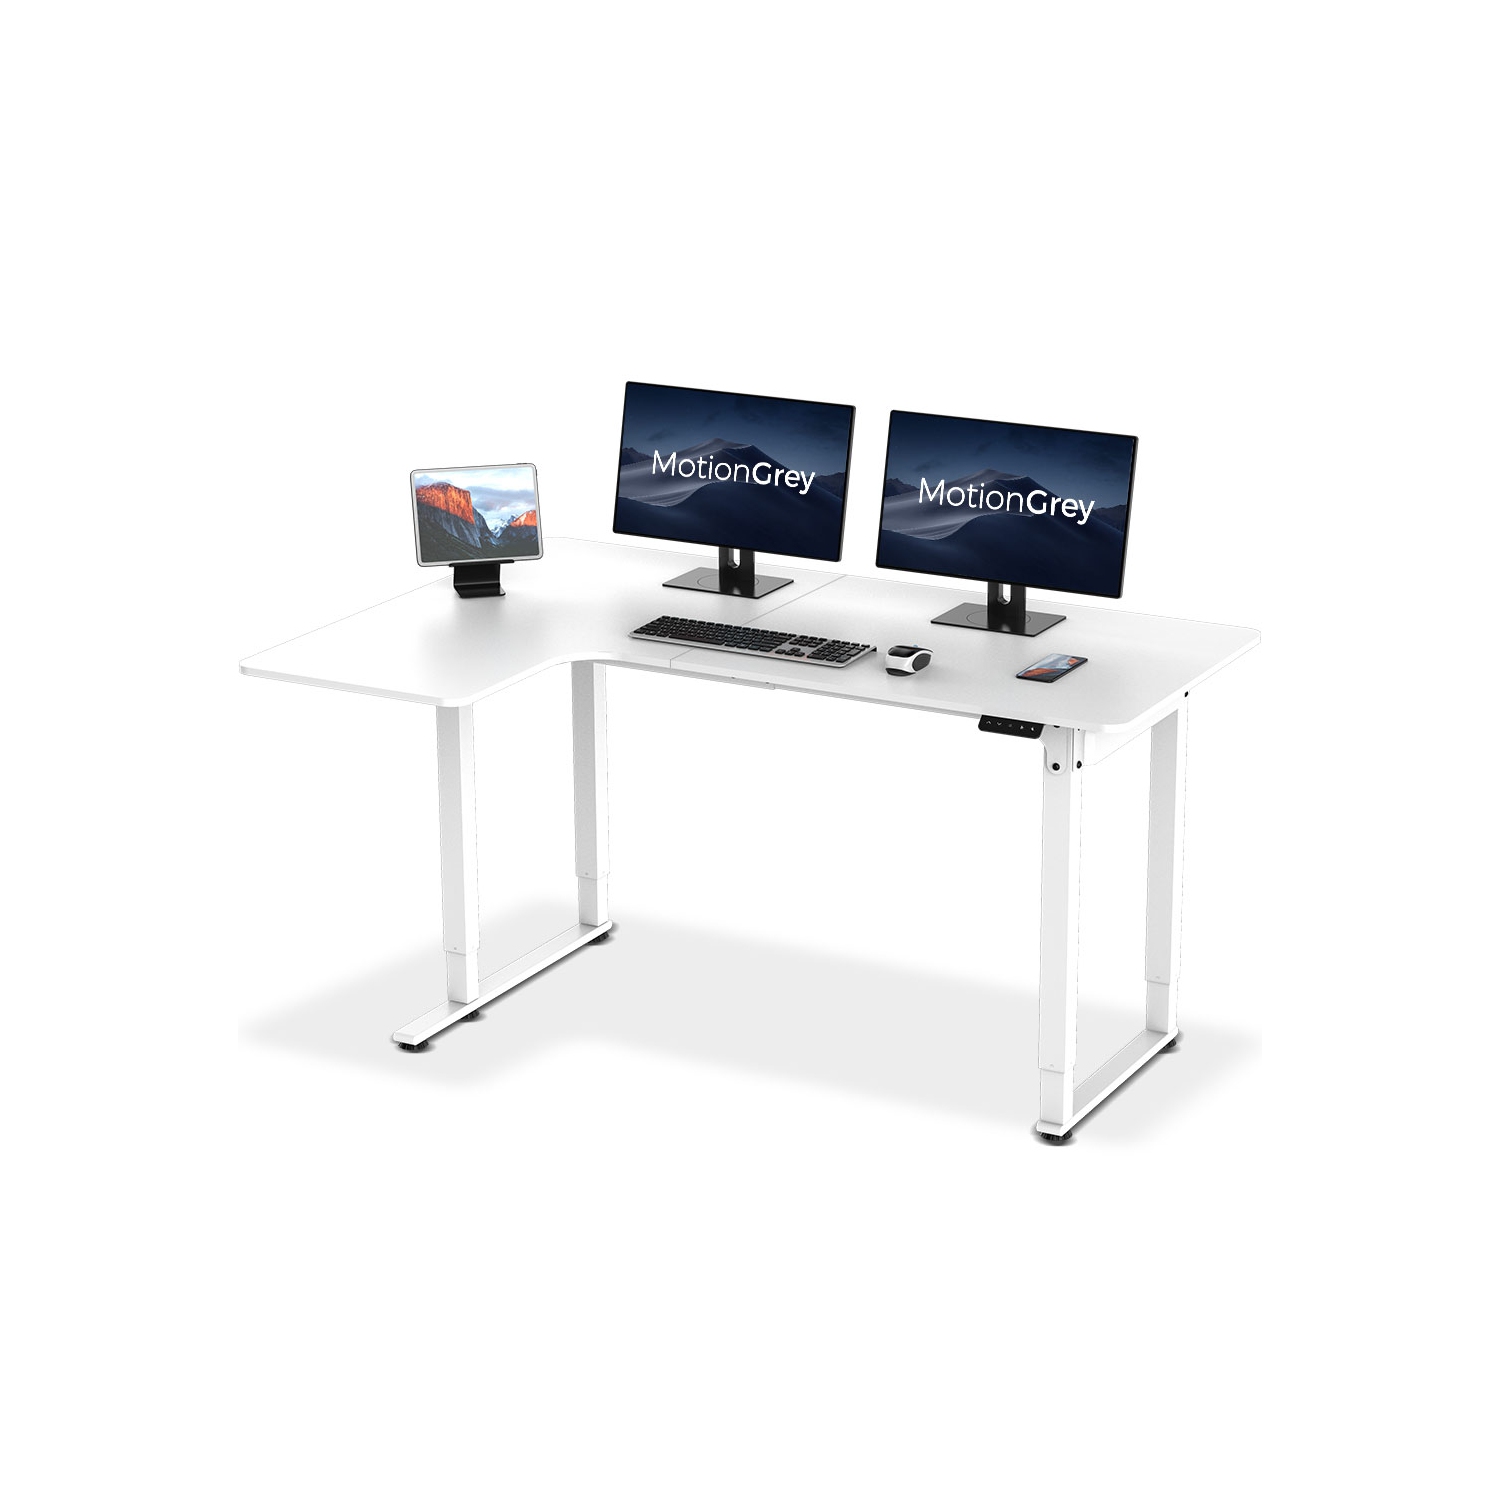 MotionGrey - Electric Height Adjustable Standing Desk, L Shaped Standing Desk, Corner Desk, Adjustable Computer Sit Stand Desk Stand - White L Shape Desk (63 Inch Table Top)